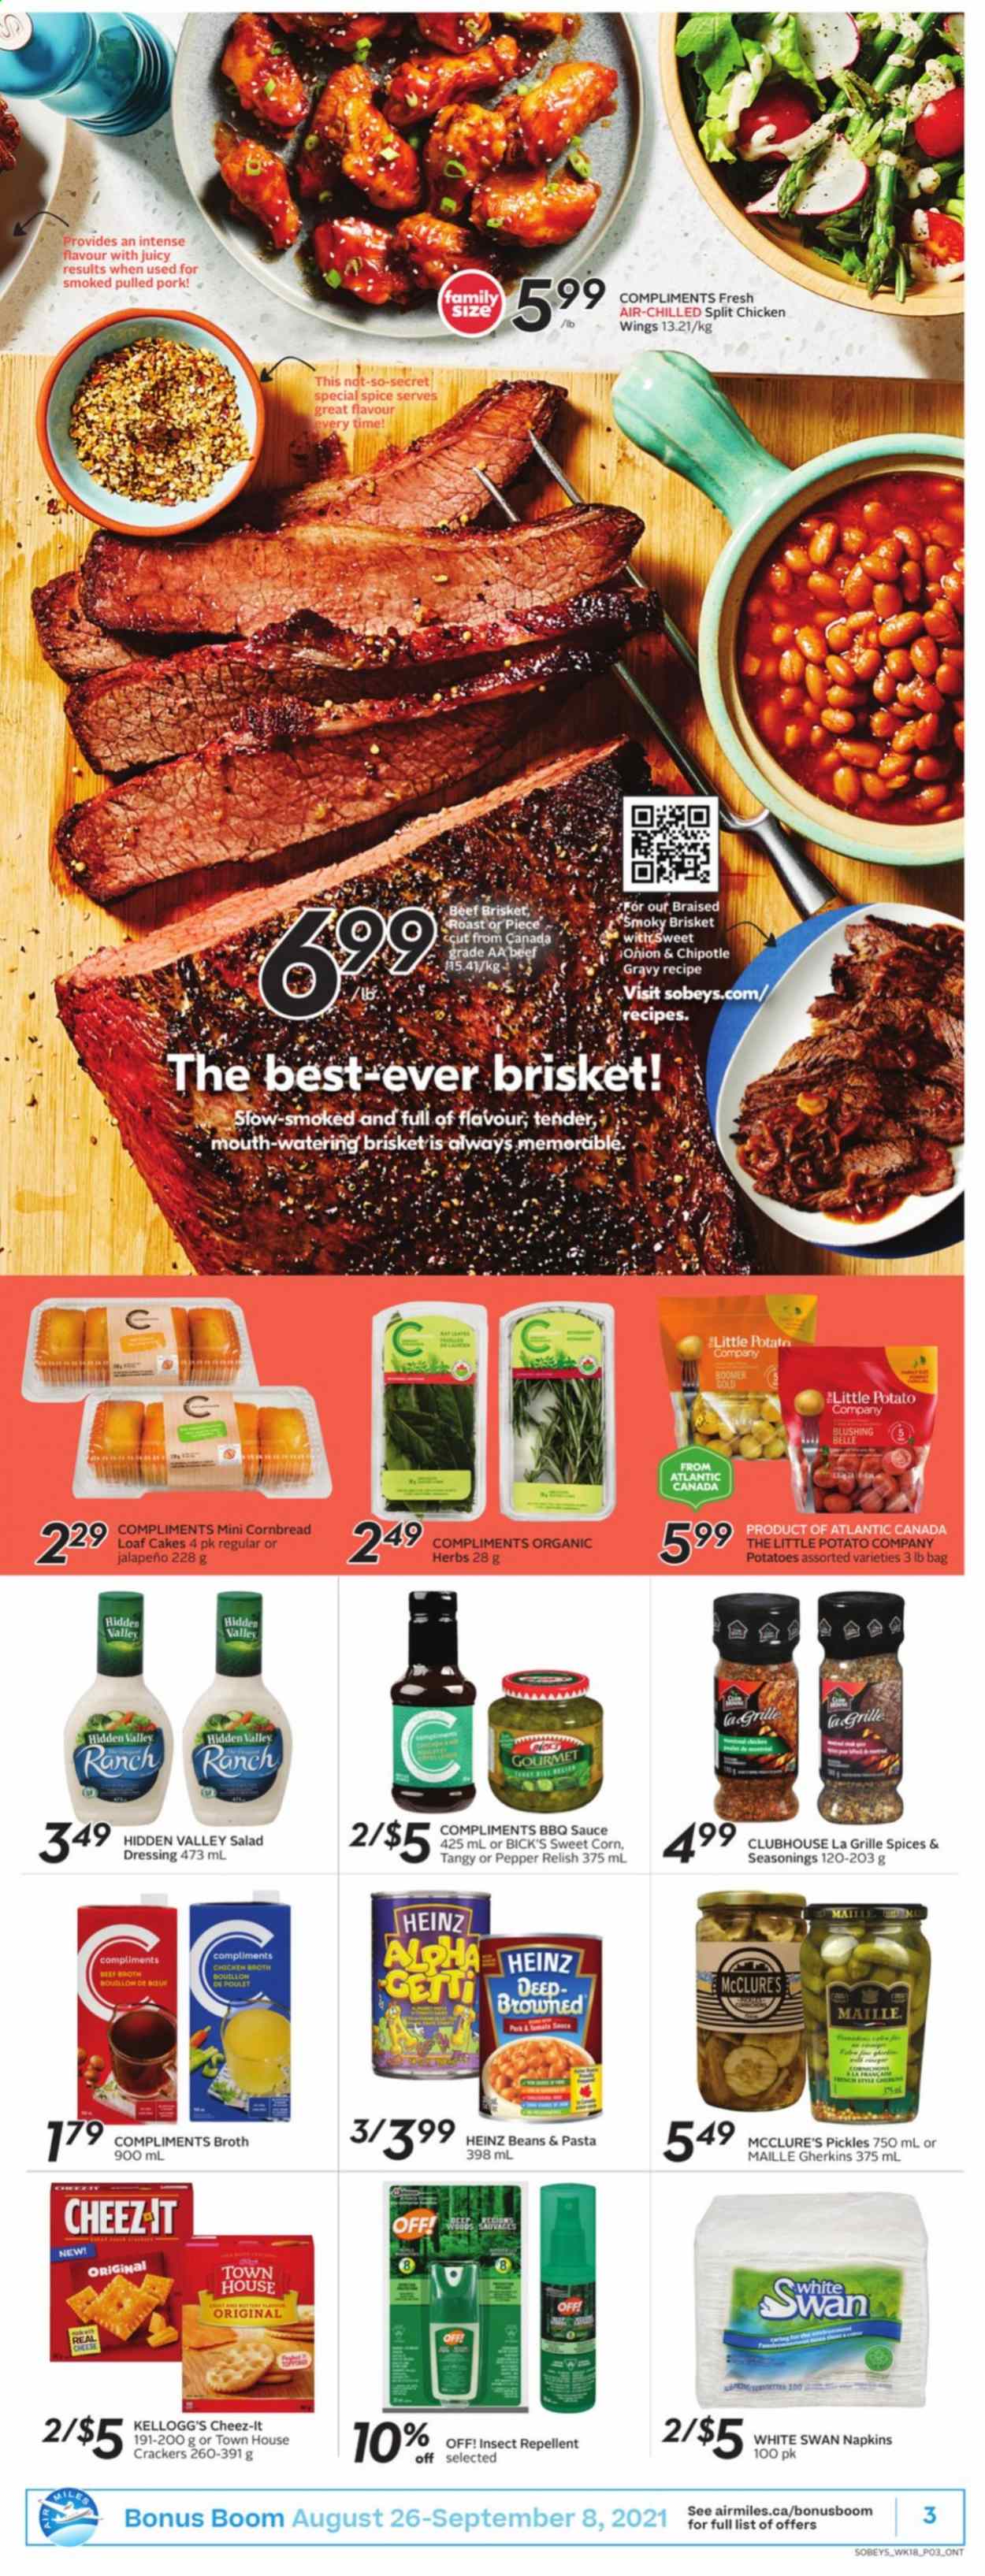 thumbnail - Sobeys Flyer - August 26, 2021 - September 01, 2021 - Sales products - cake, corn bread, potatoes, pasta, sauce, pulled pork, chicken wings, crackers, Kellogg's, Cheez-It, beef broth, bouillon, chicken broth, broth, Heinz, pickles, spice, herbs, BBQ sauce, dressing, beef meat, beef brisket, pork meat, napkins, repellent. Page 4.